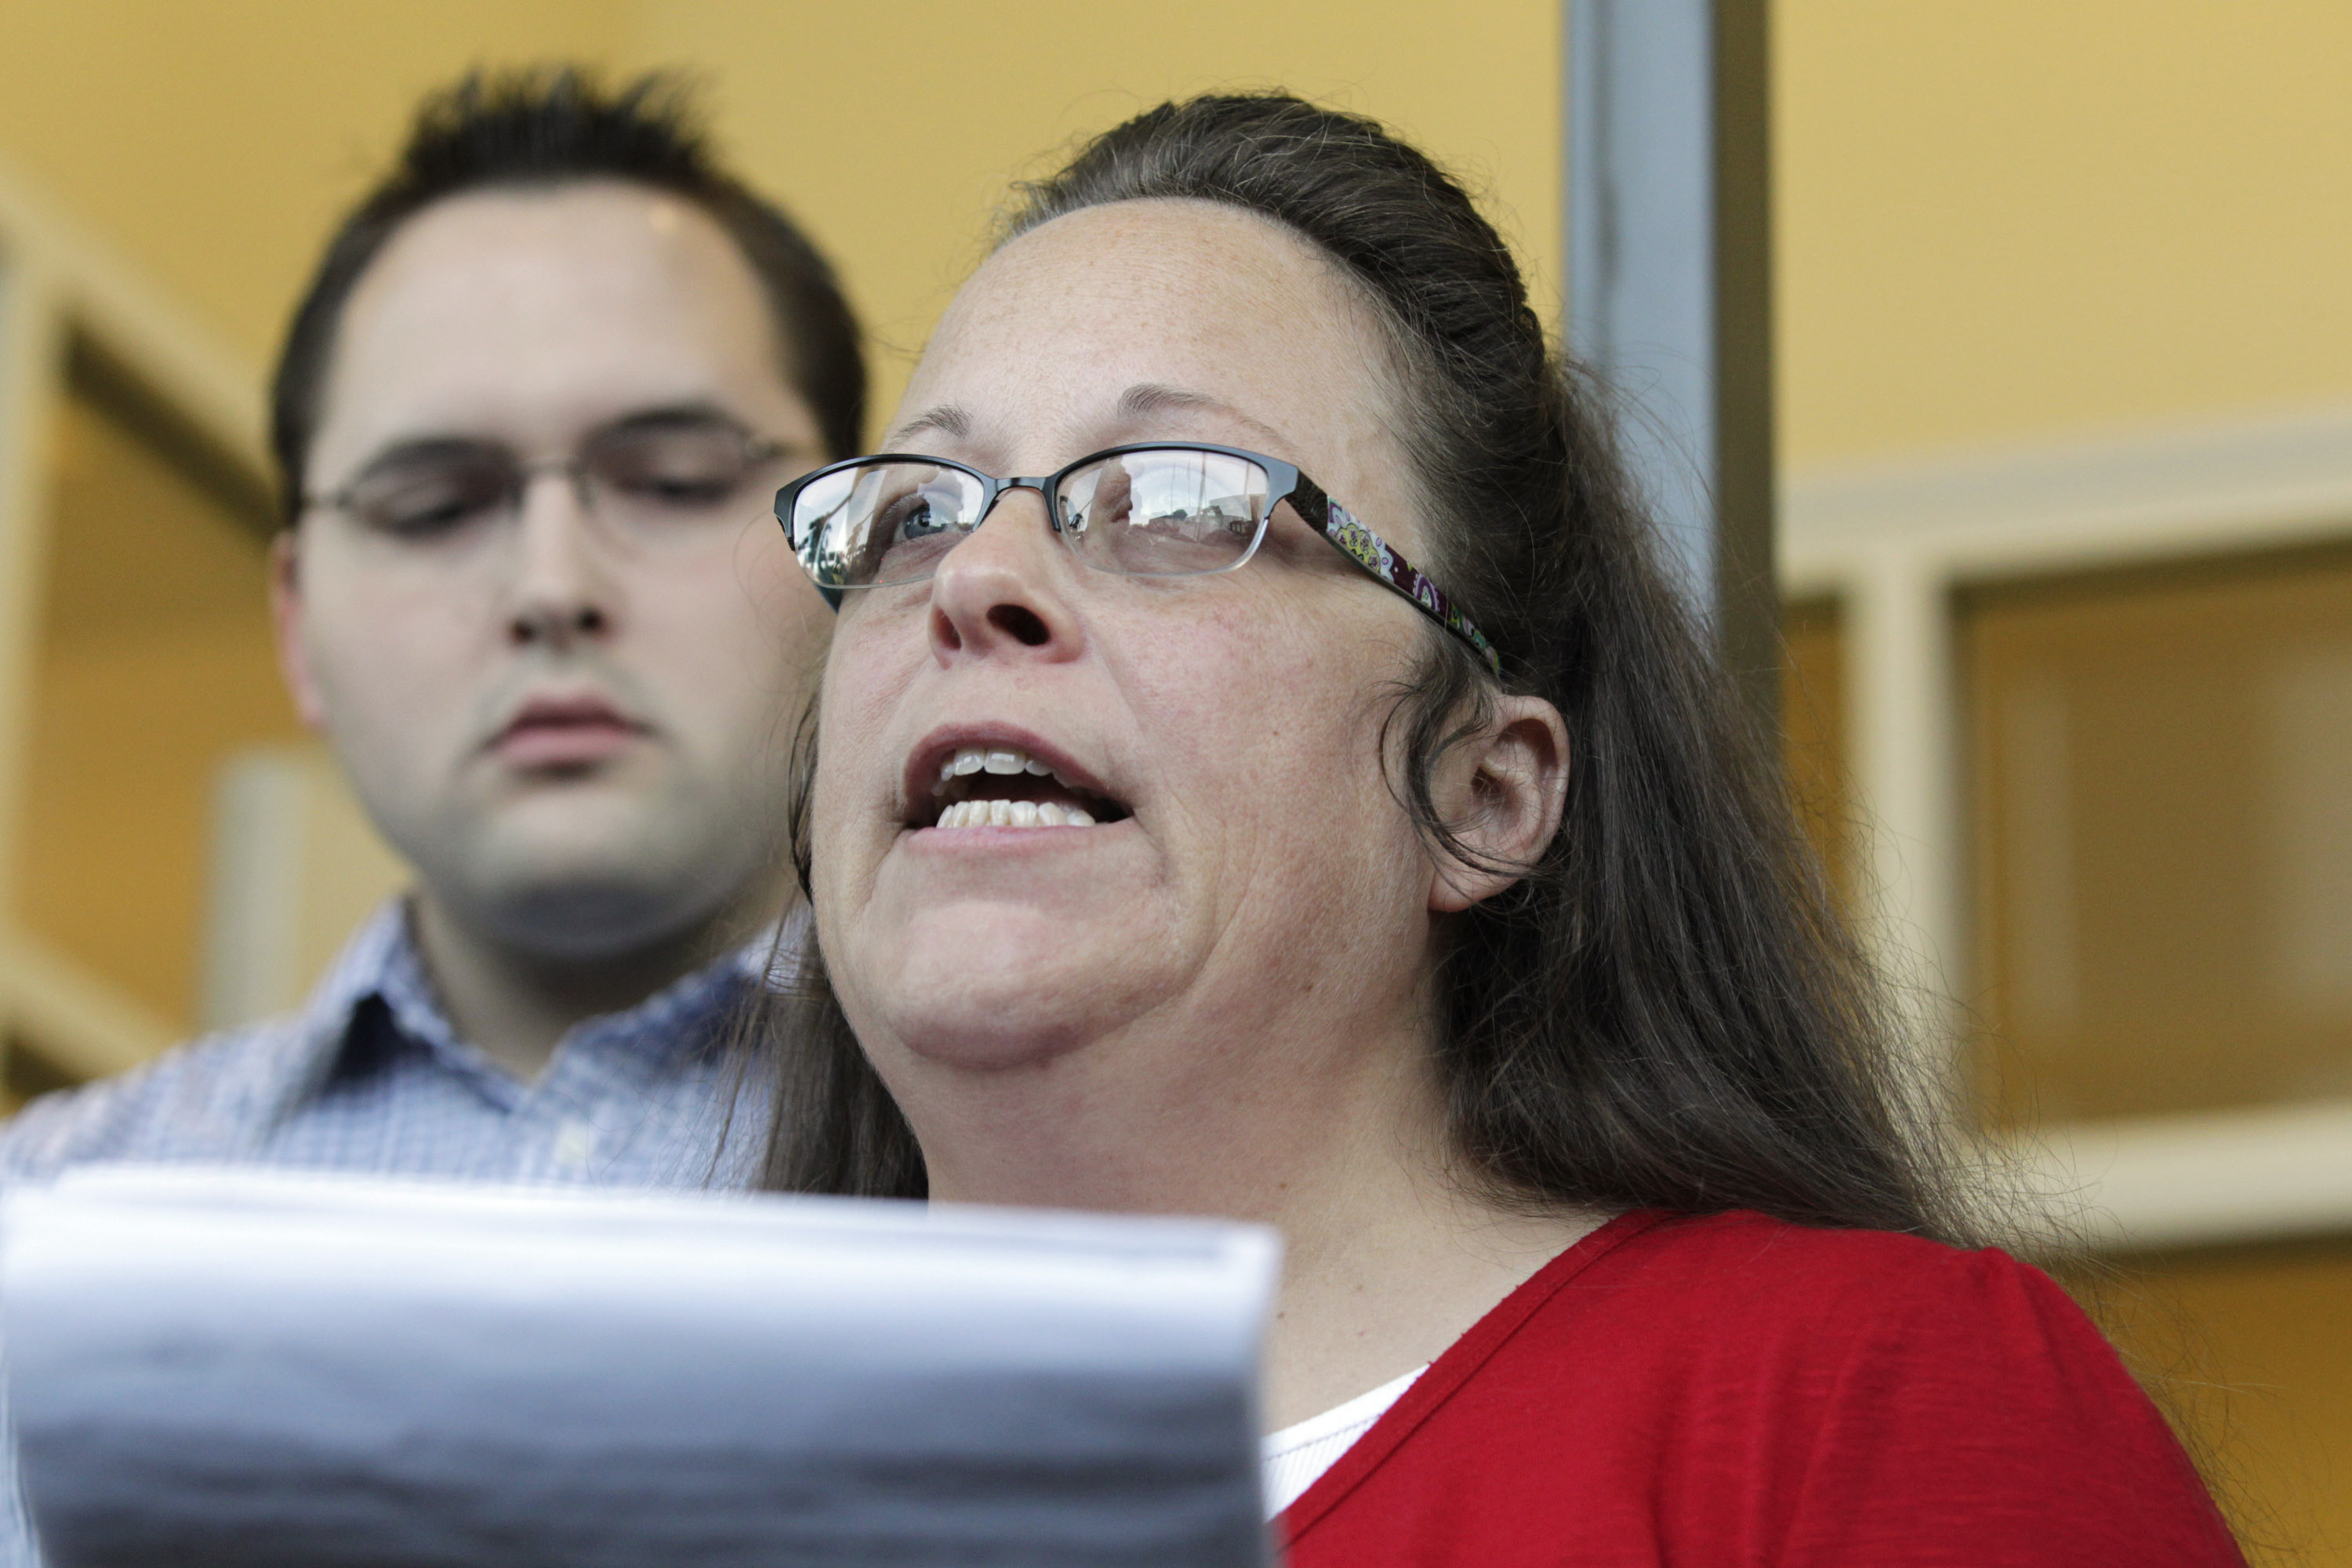 Rowan County Clerk Kim Davis, with son Nathan Davis, a deputy clerk, reads a statement to the press outside the Rowan County Courthouse on Sept. 14, 2015 in Morehead, Ky. (Pablo Alcala/Lexington Herald--Leader/TNSGetty Images) (Lexington Herald-Leader&mdash;TNS via Getty Images)